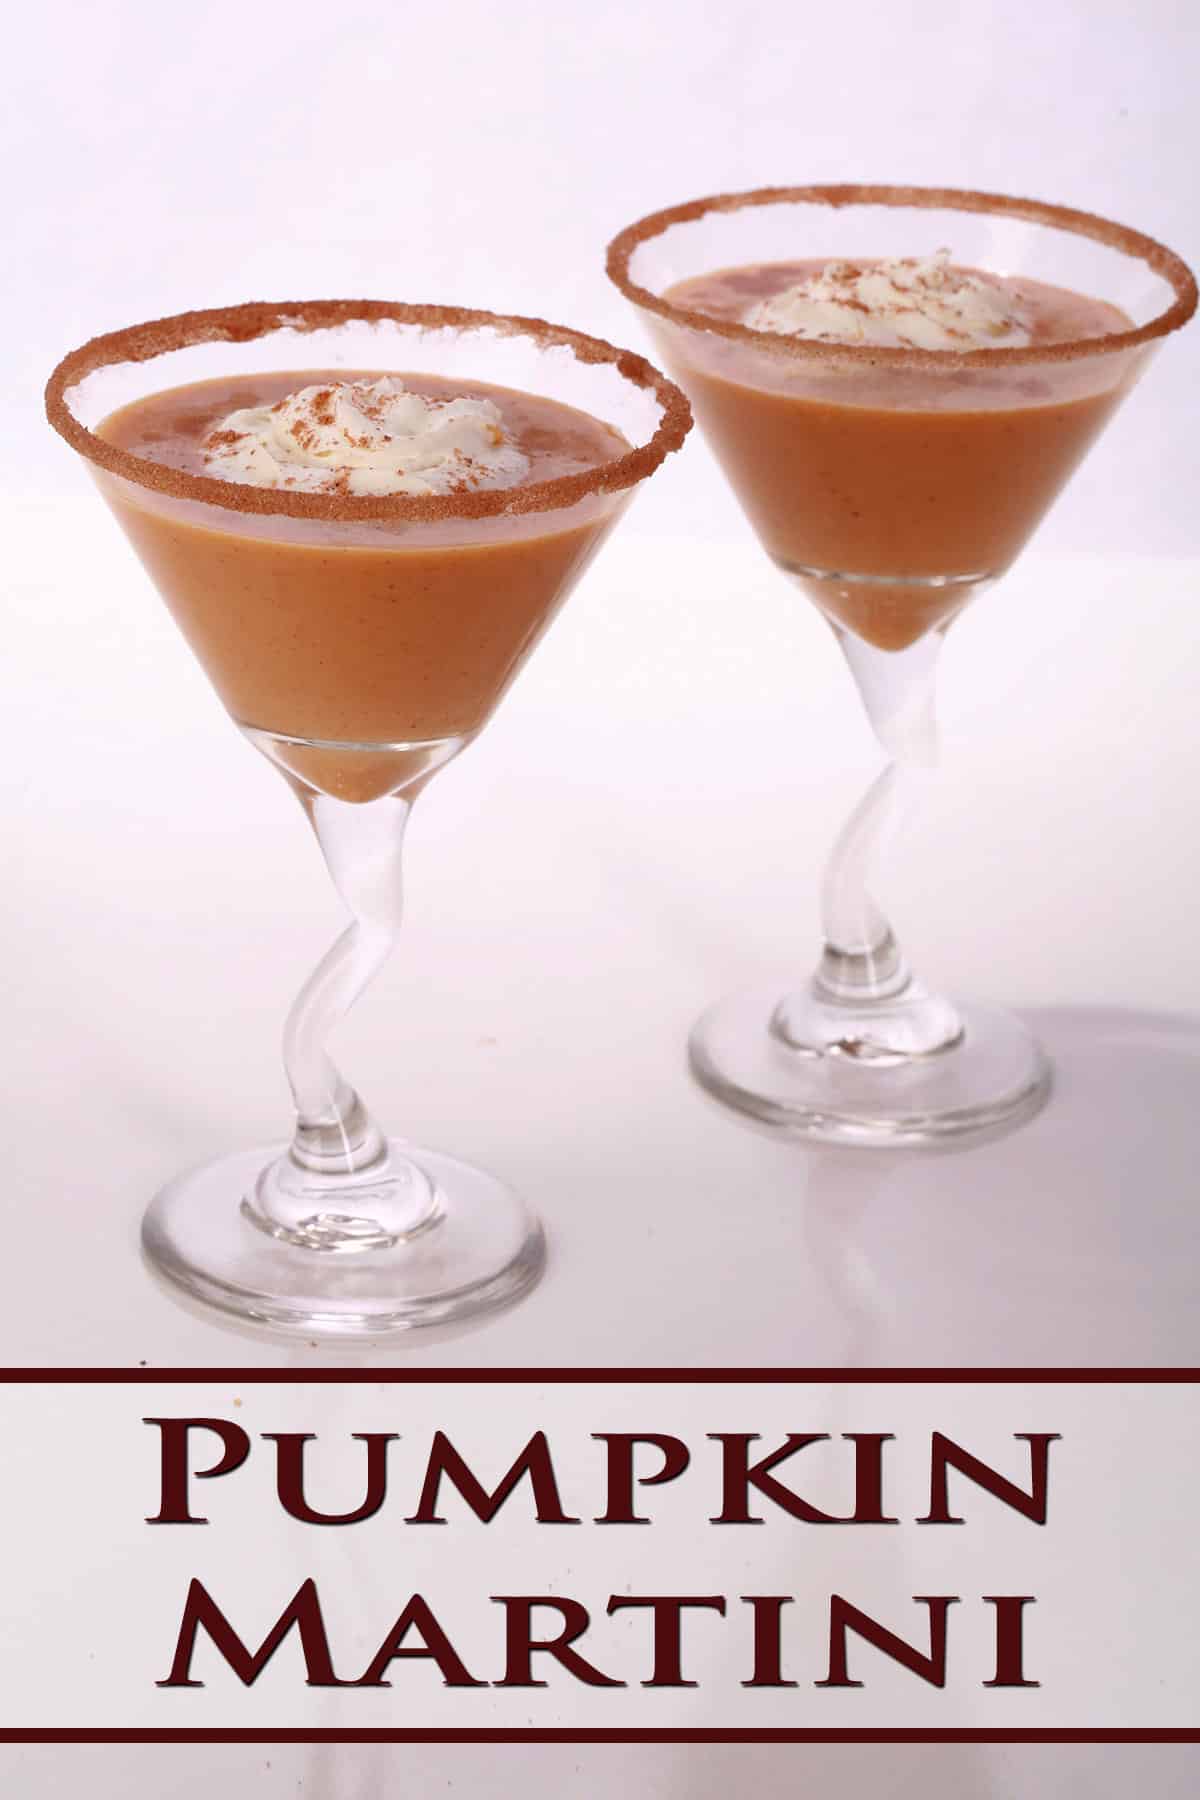 2 Pumpkin Pie Martini cocktails with spiced sugar rim and whipped cream.